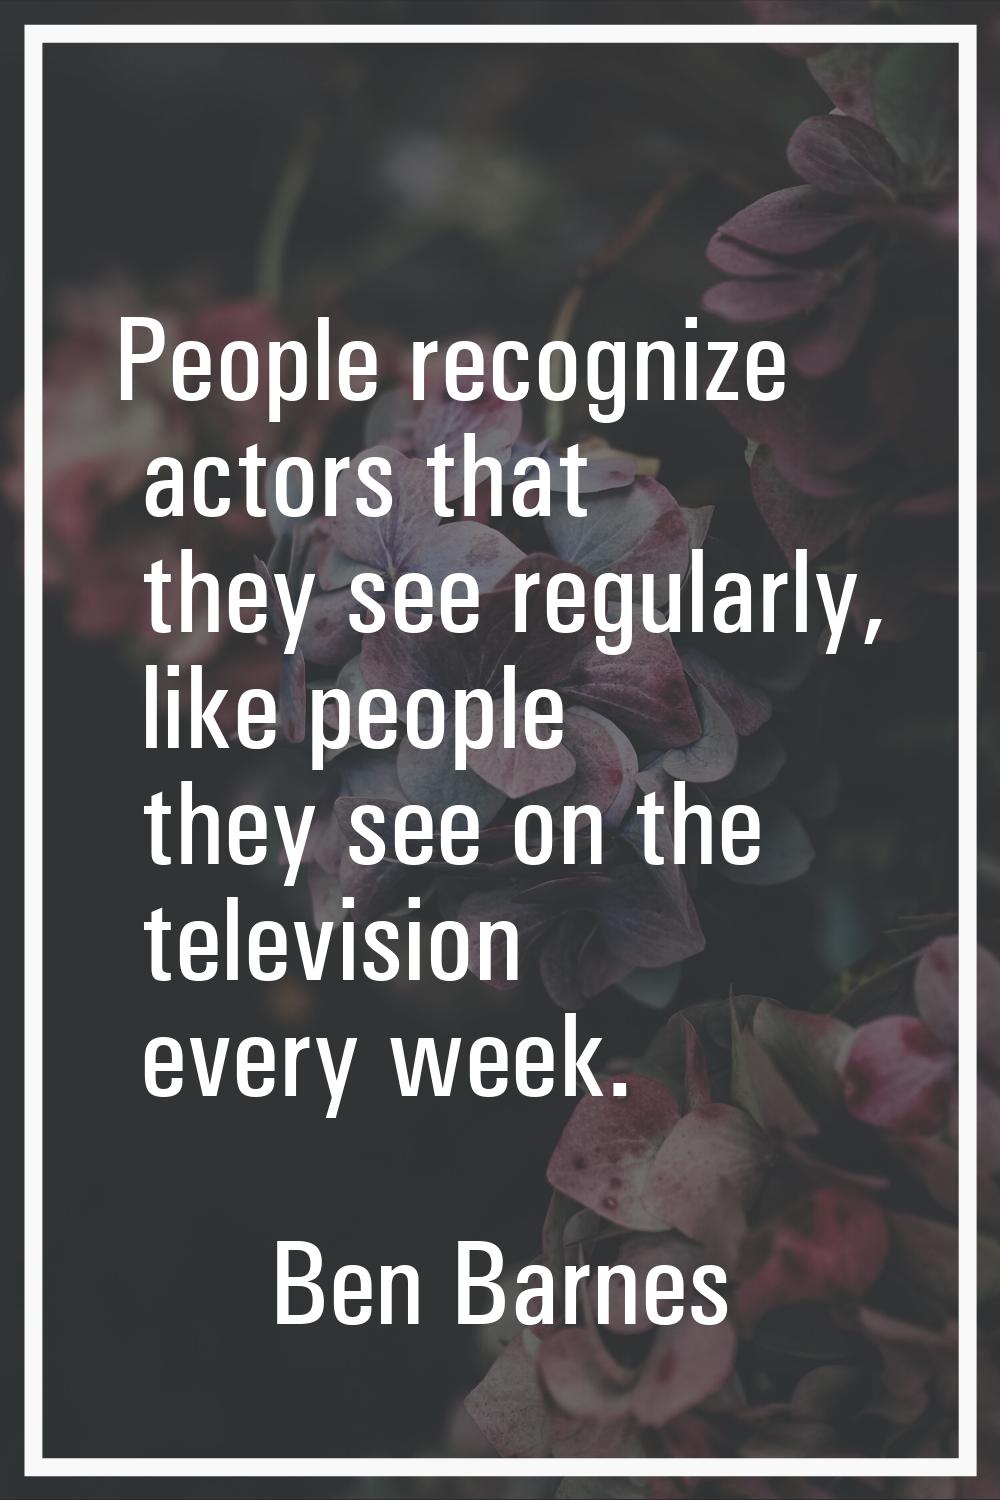 People recognize actors that they see regularly, like people they see on the television every week.